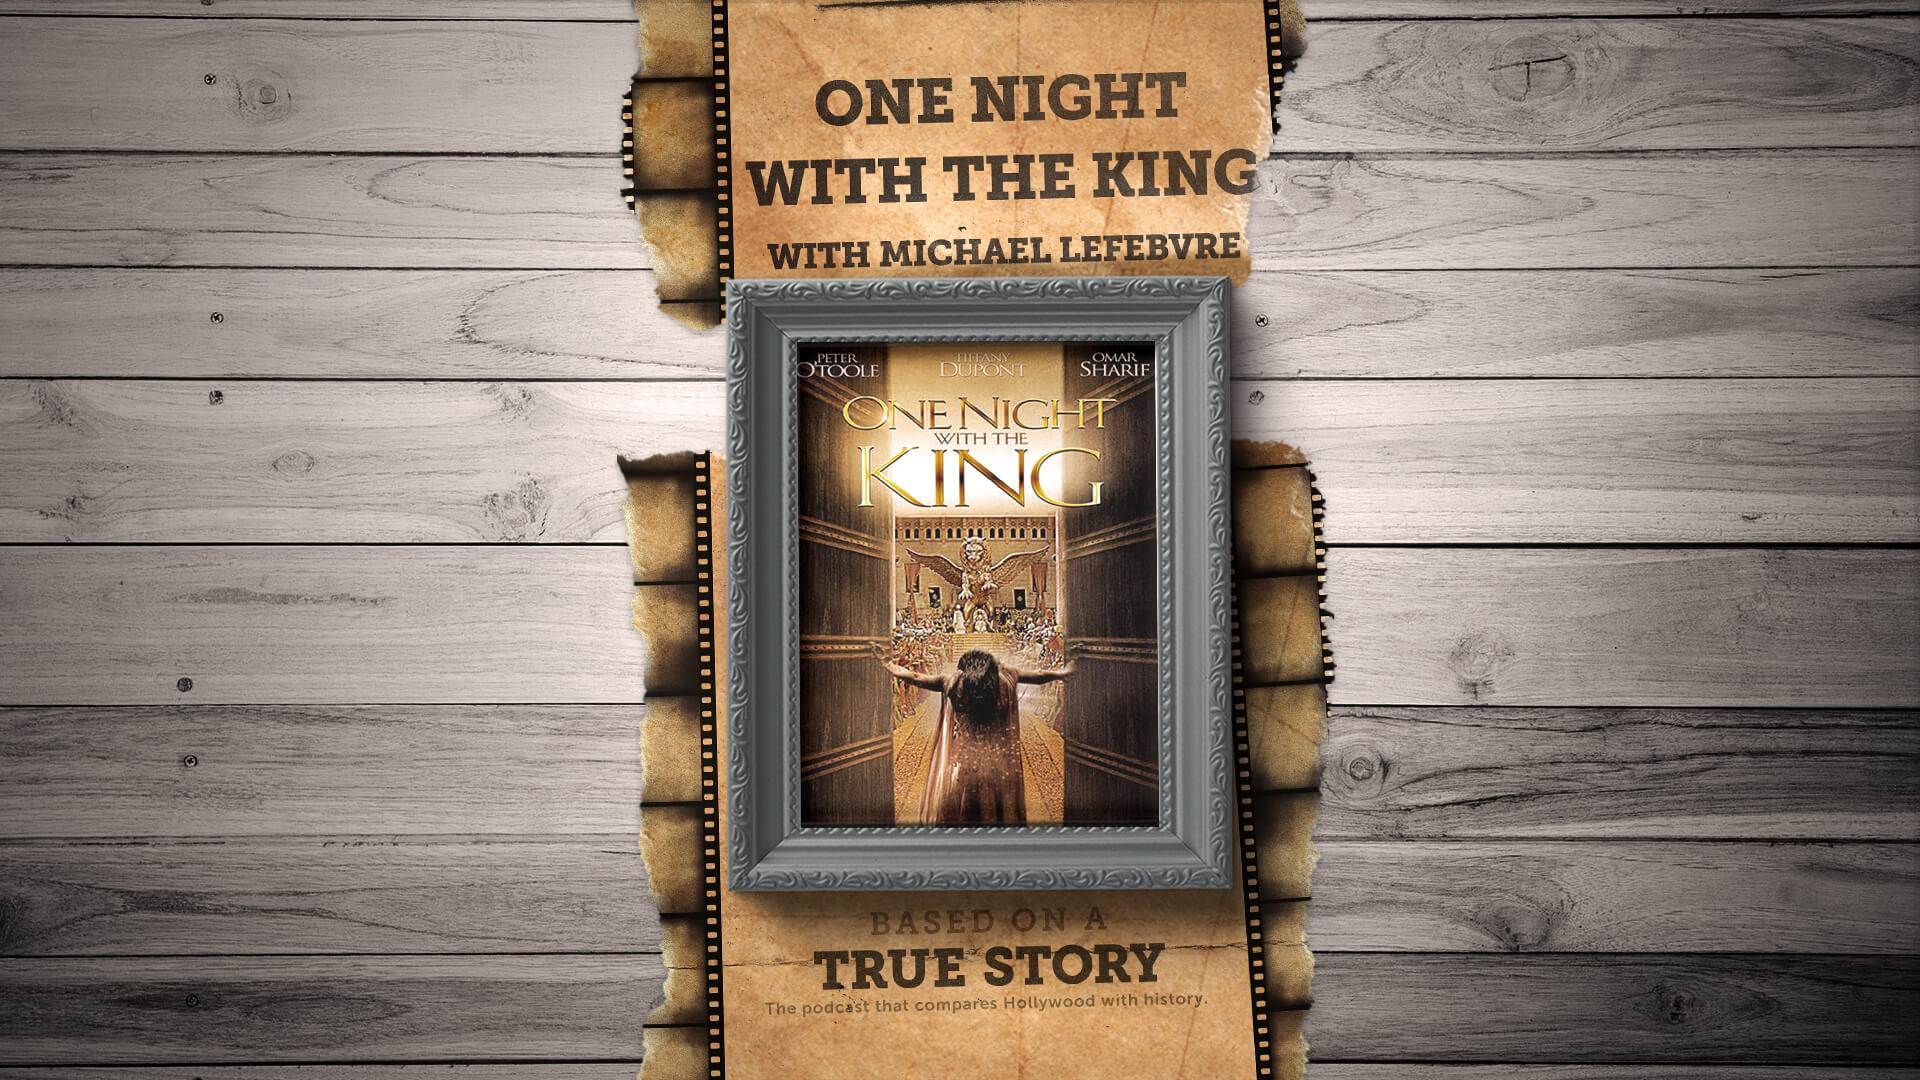 229 One Night with the King with Michael LeFebvre Based on a True Story Podcast